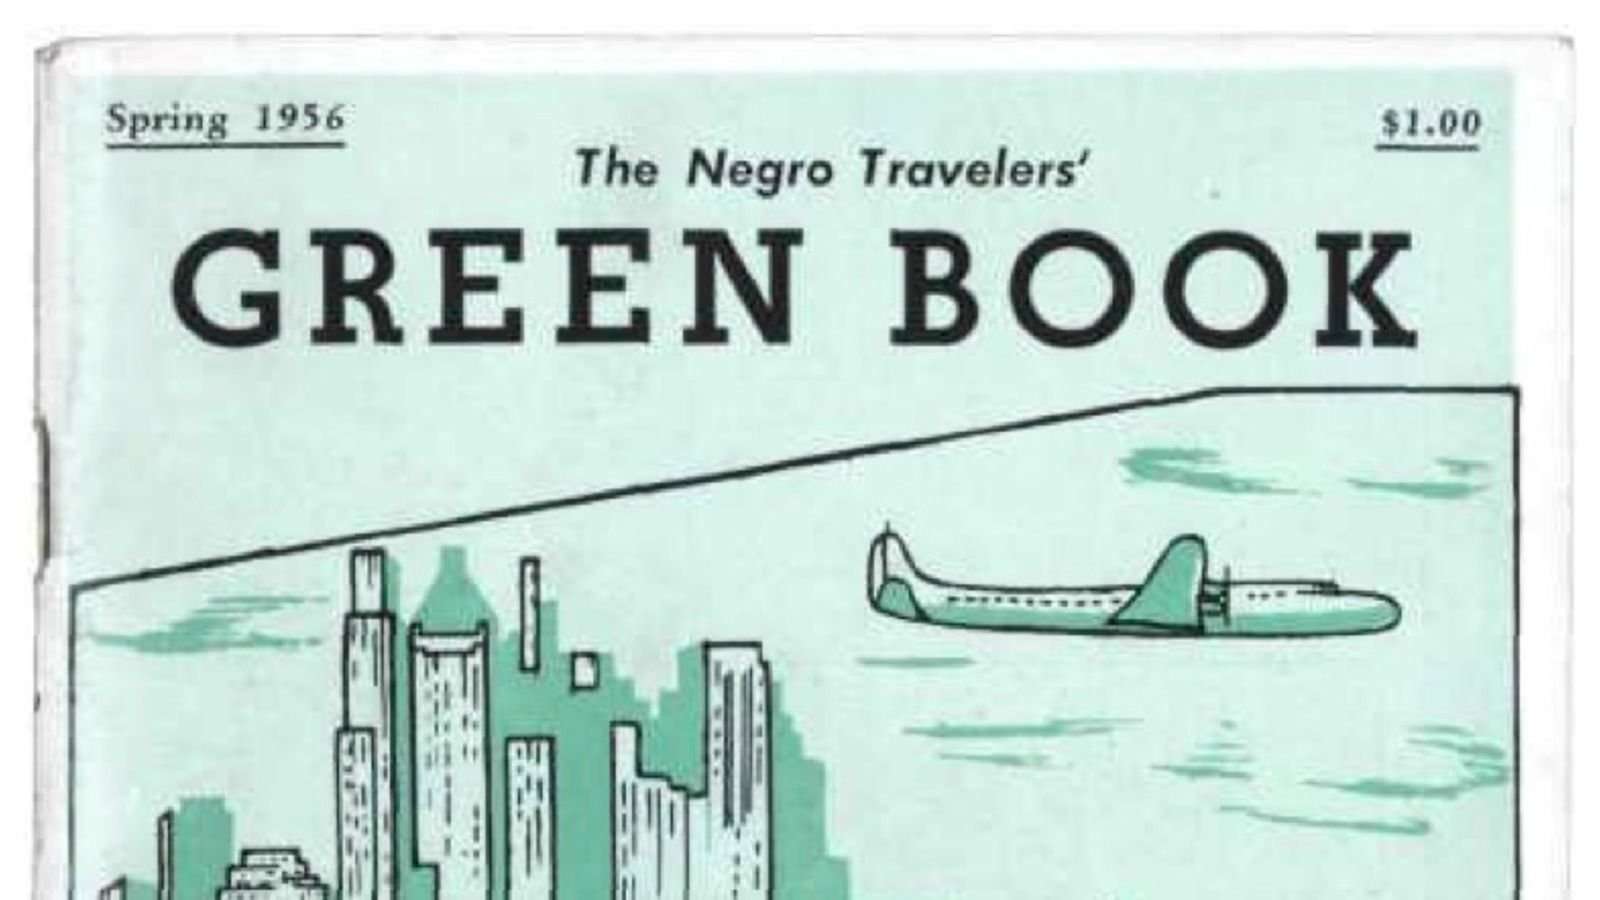 image for This 1956 guidebook for black travelers is an important reminder of America's racist past